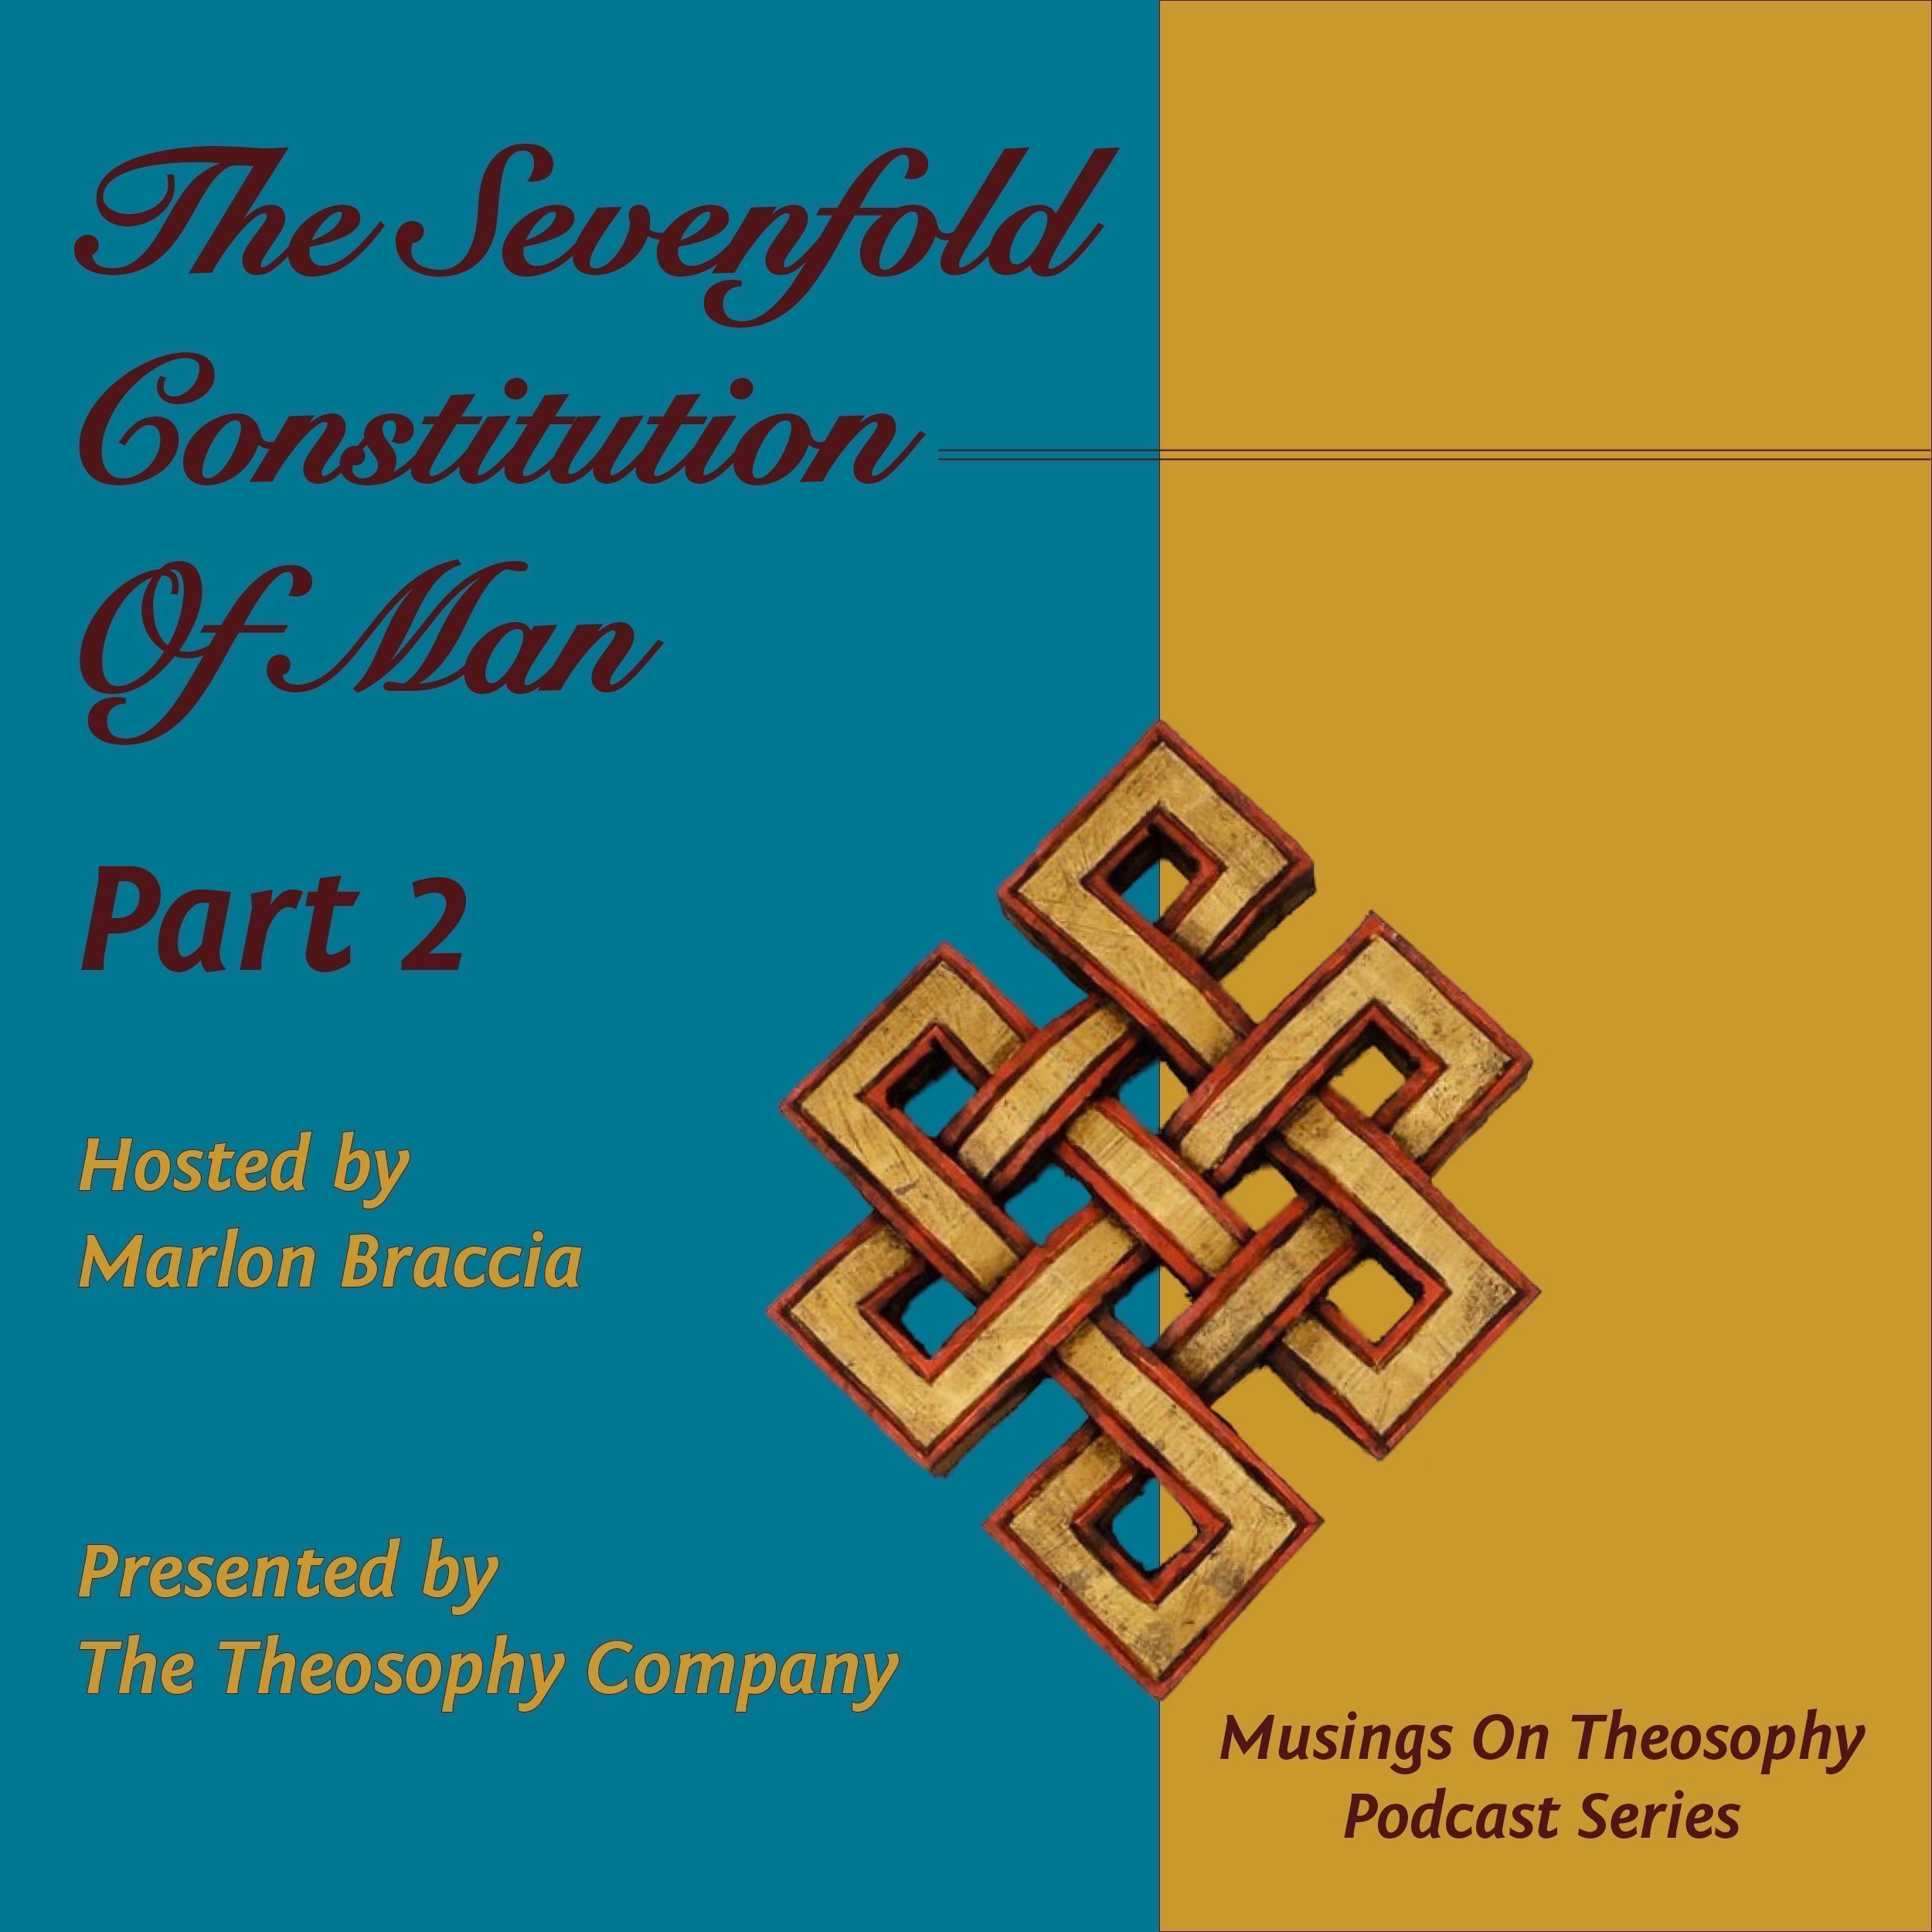 The Sevenfold Constitution of Man - Part 2